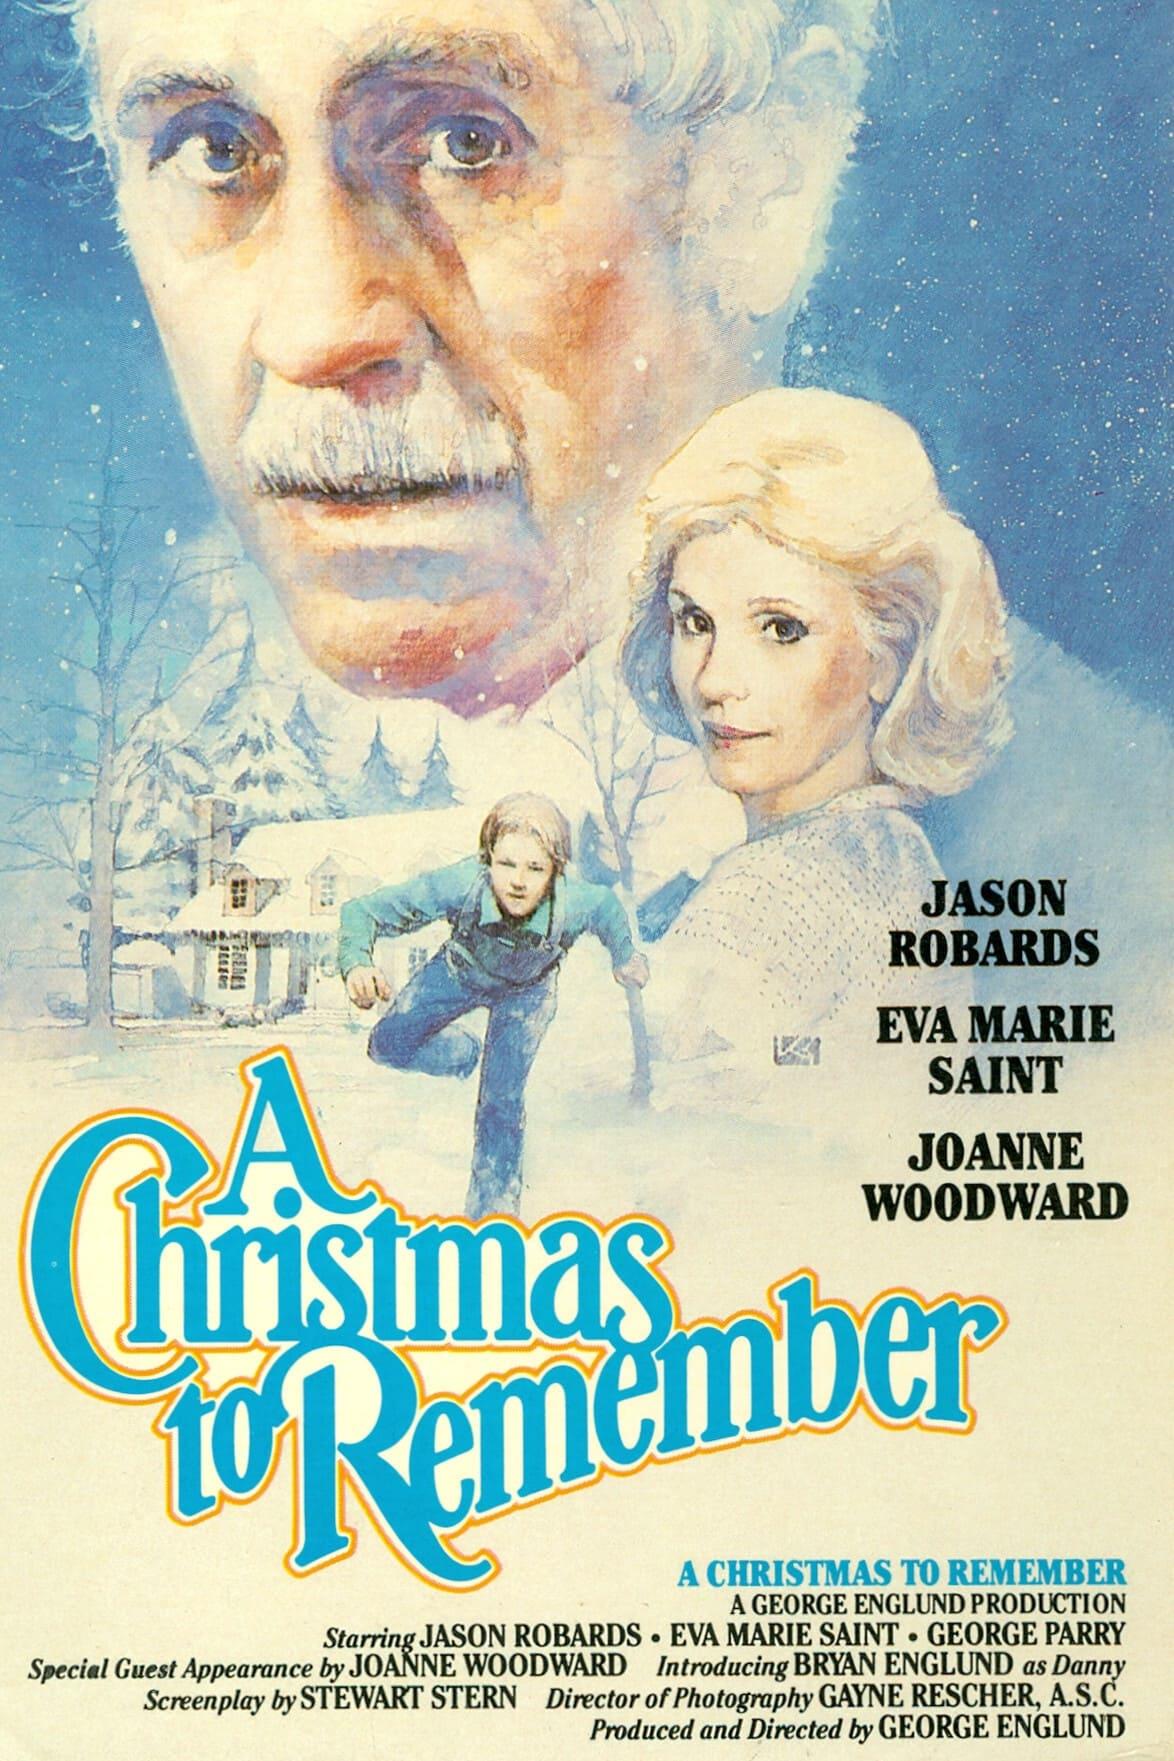 A Christmas to Remember poster